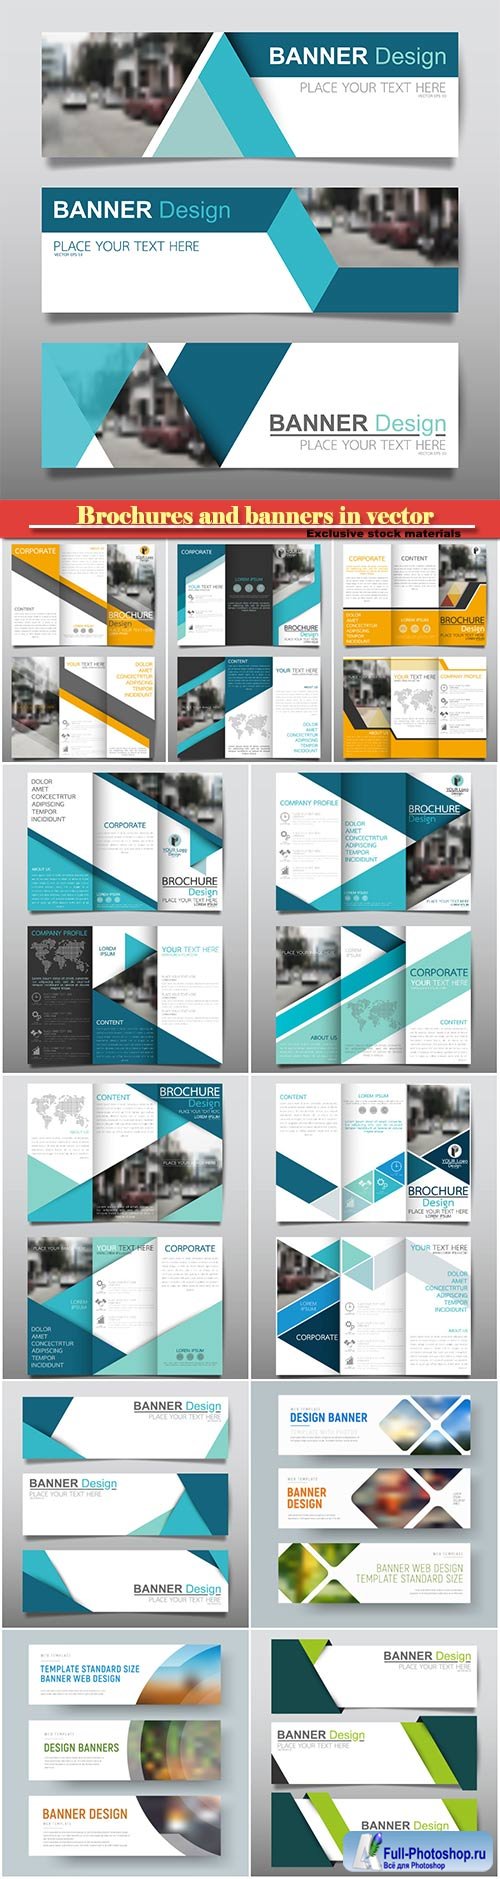 Brochures and banners in vector